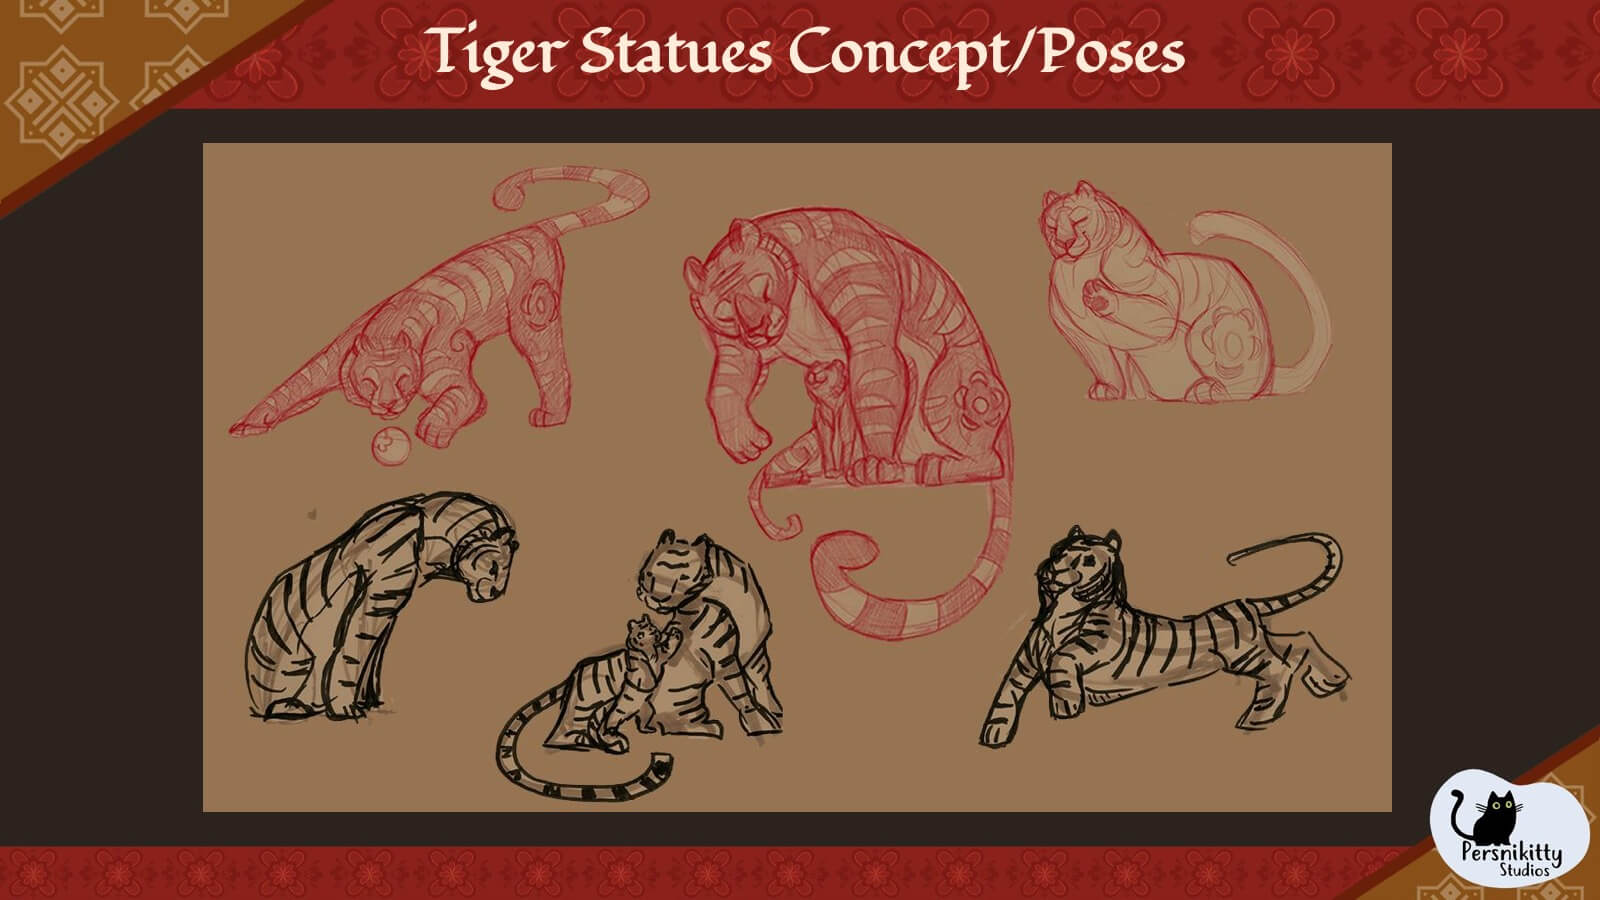 A slide displaying a variety of poses for the film's tiger statues.